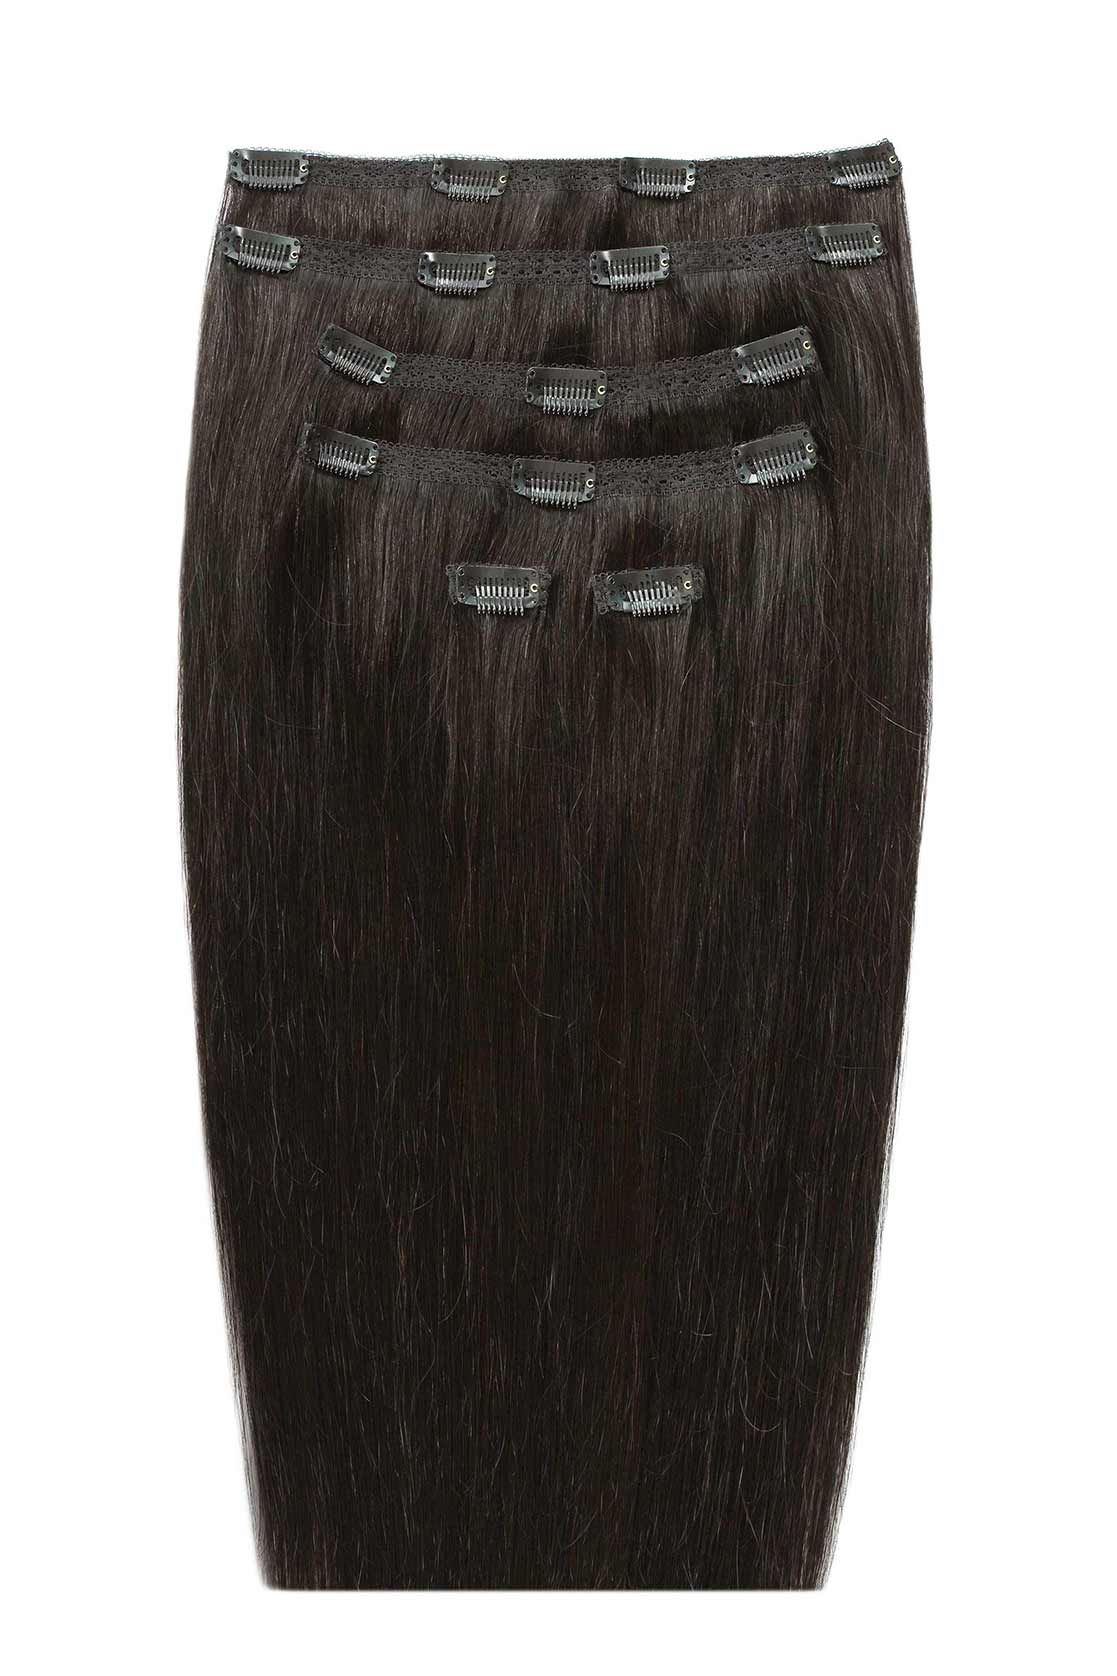 Beauty Works Double Hair Set 20 inch